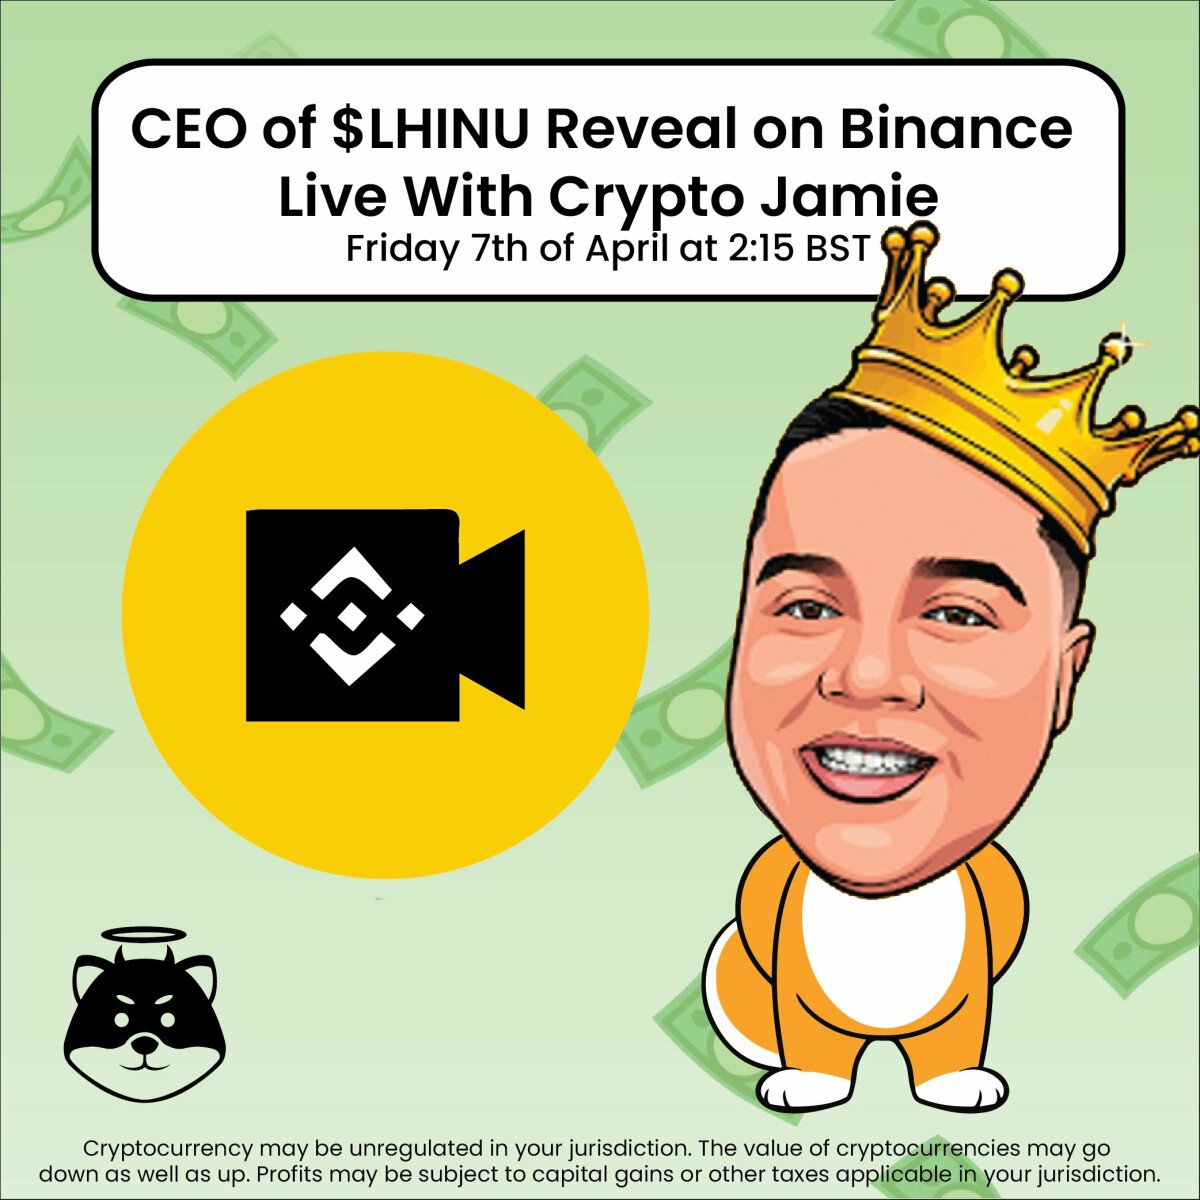 Love Hate Inu Reveals Meme Coin Legend Carl Dawkins as CEO – “I’m here to Beat the 10x on Tamadoge”